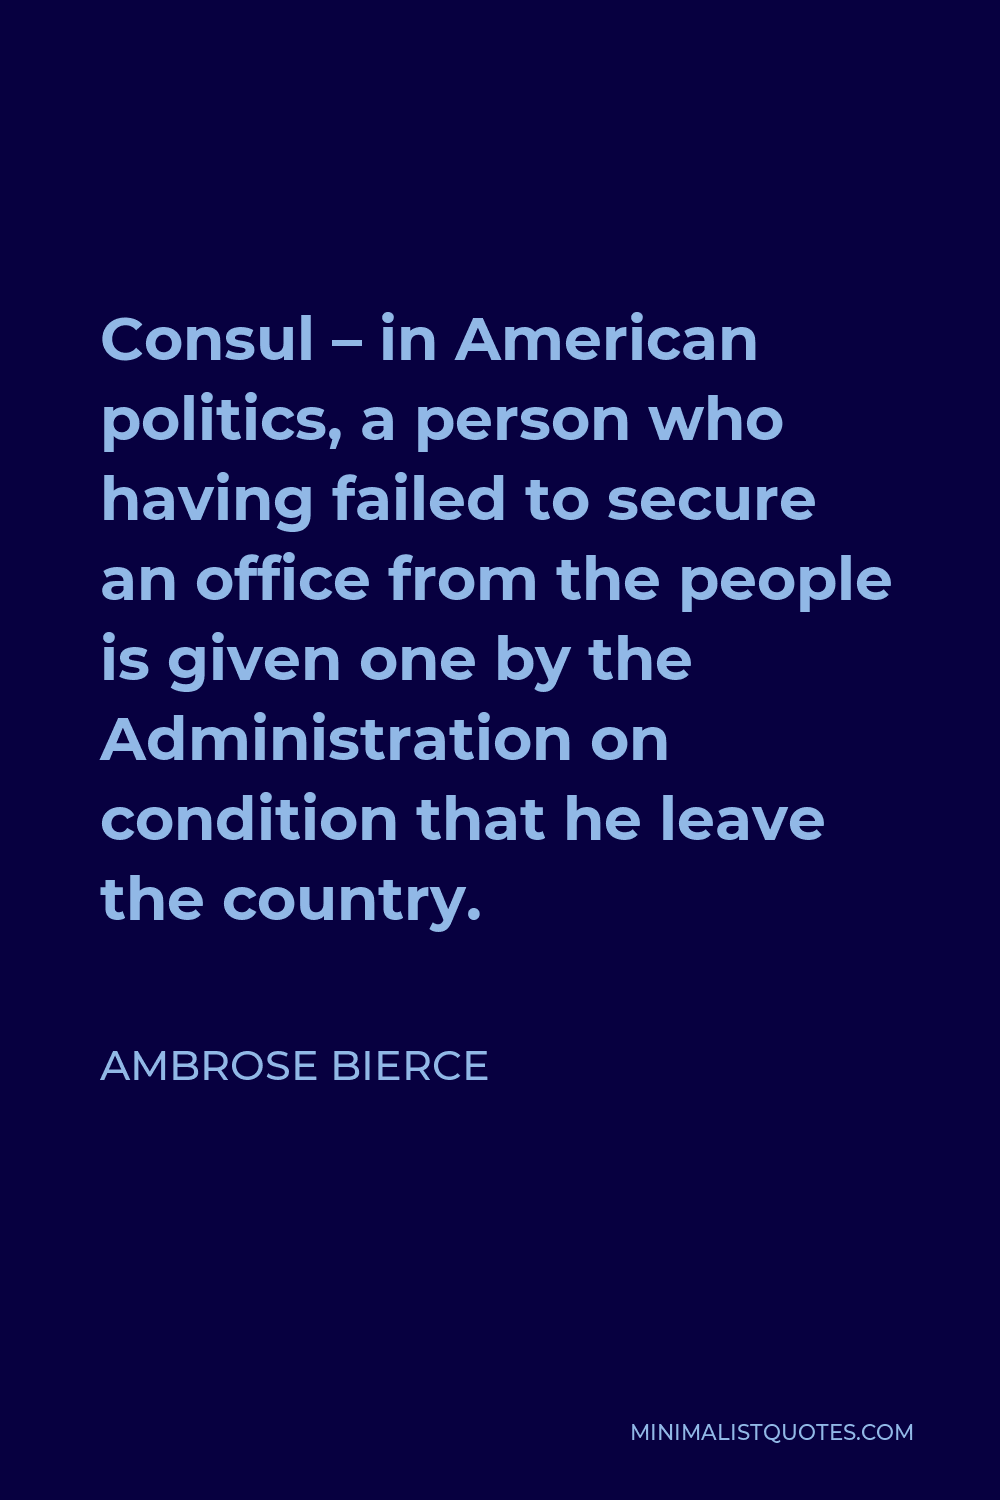 Ambrose Bierce Quote - Consul – in American politics, a person who having failed to secure an office from the people is given one by the Administration on condition that he leave the country.